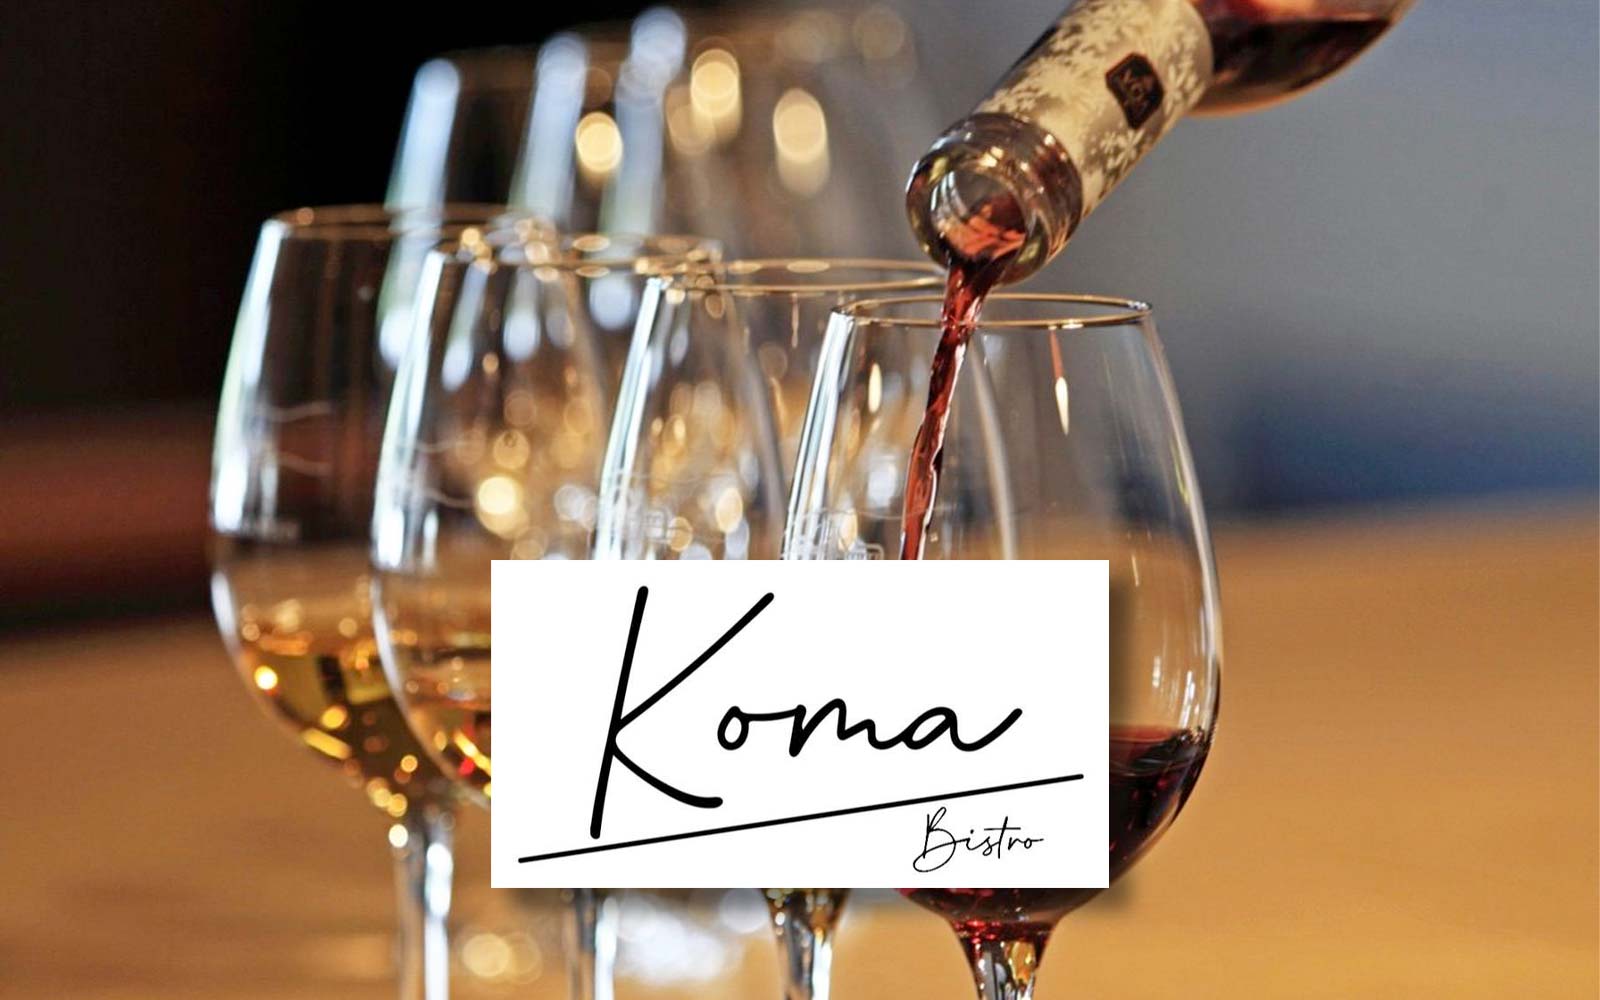 Koma Bistro Planned For Fall Opening